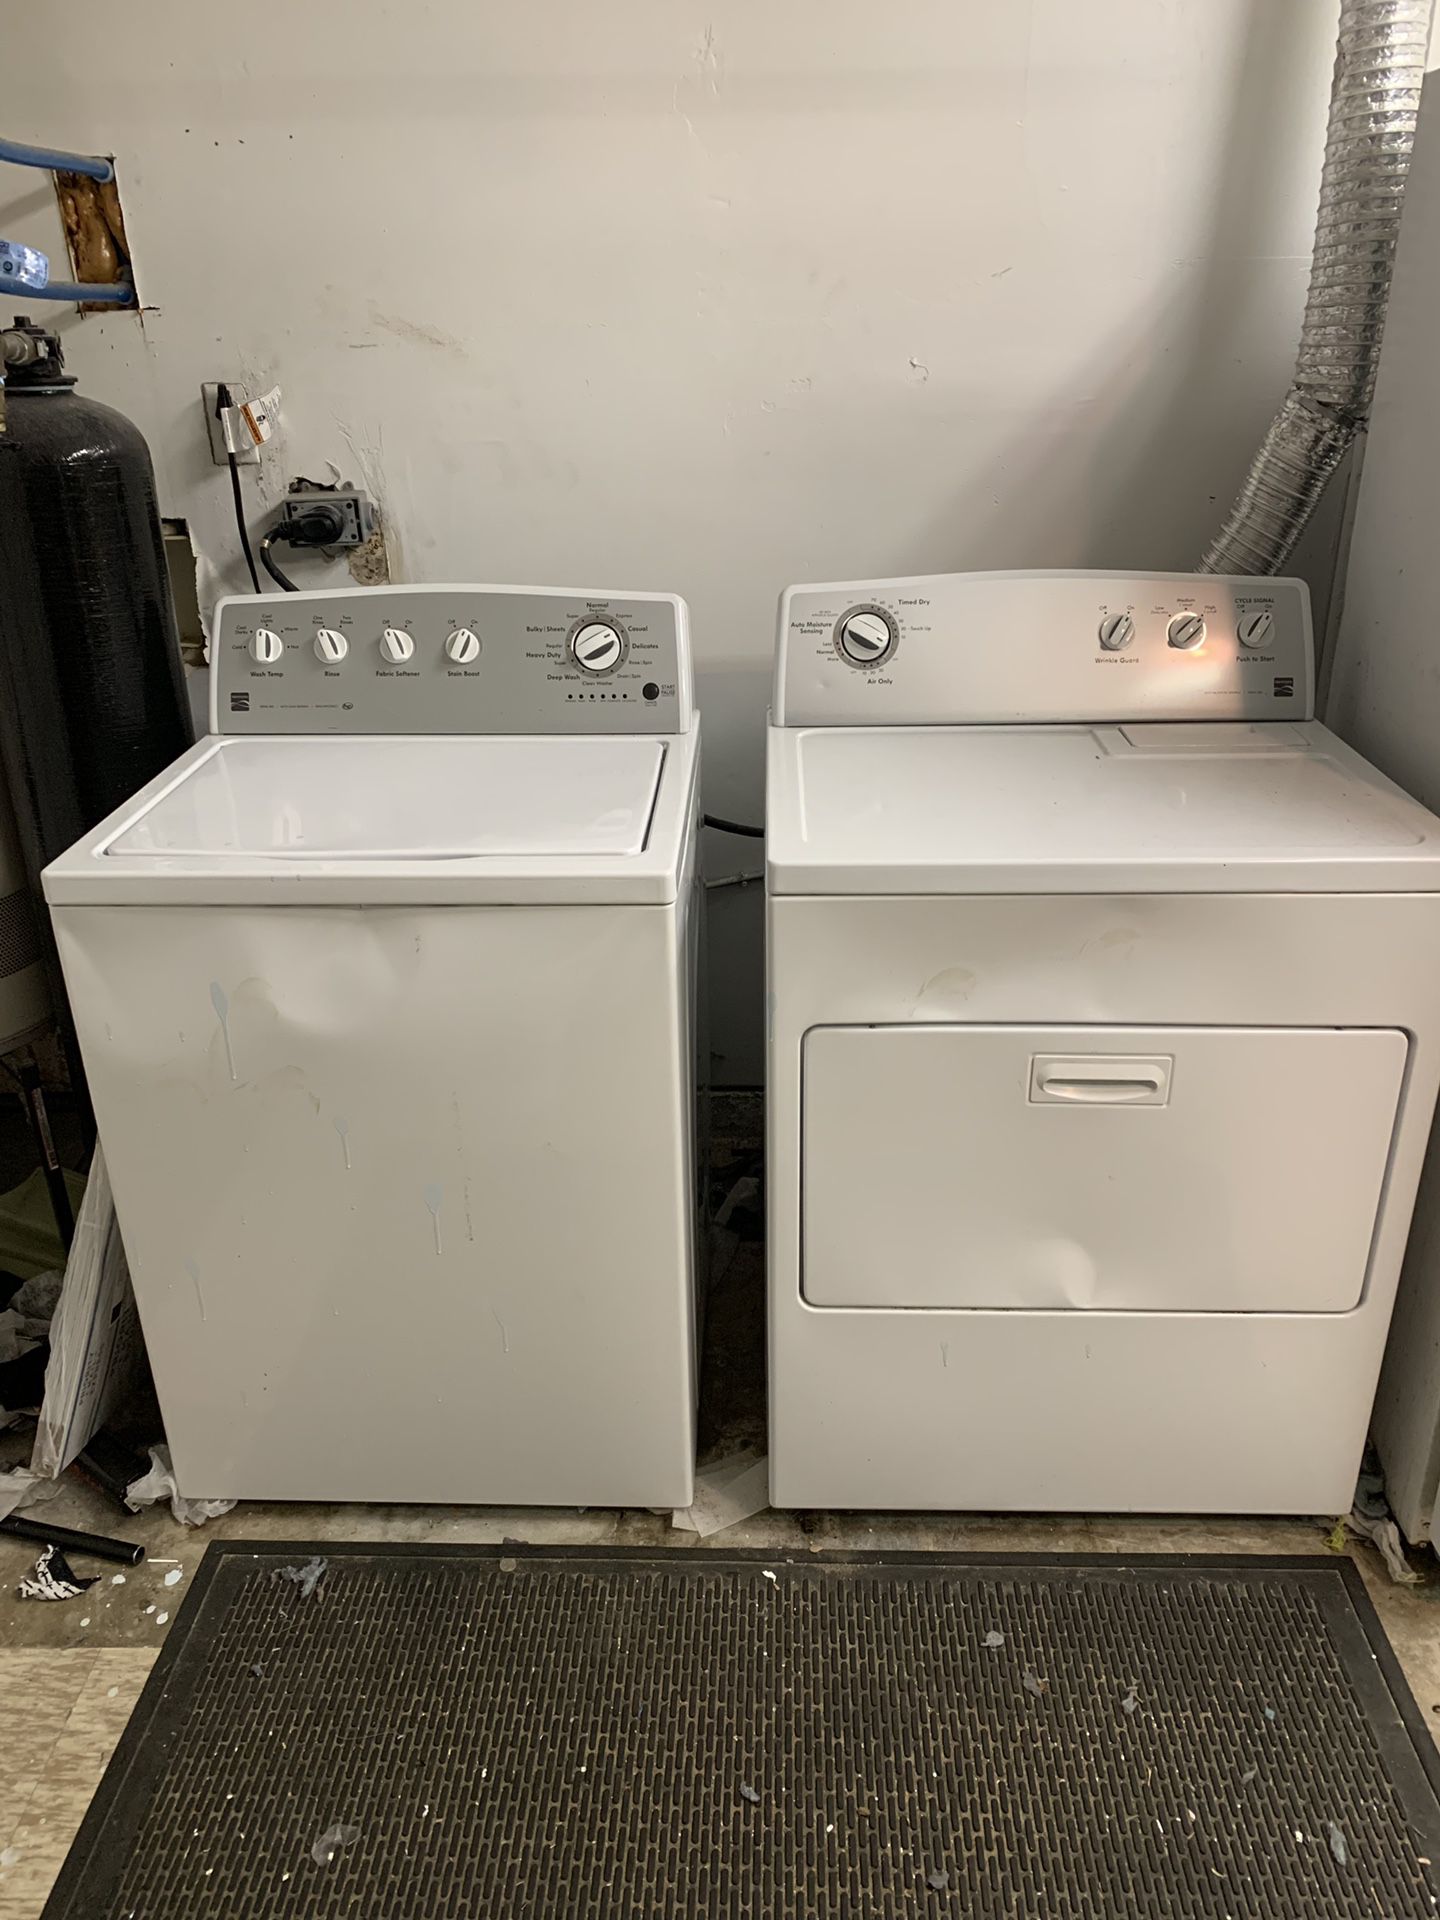 Kenmore series 500 Gas washer and dryer set